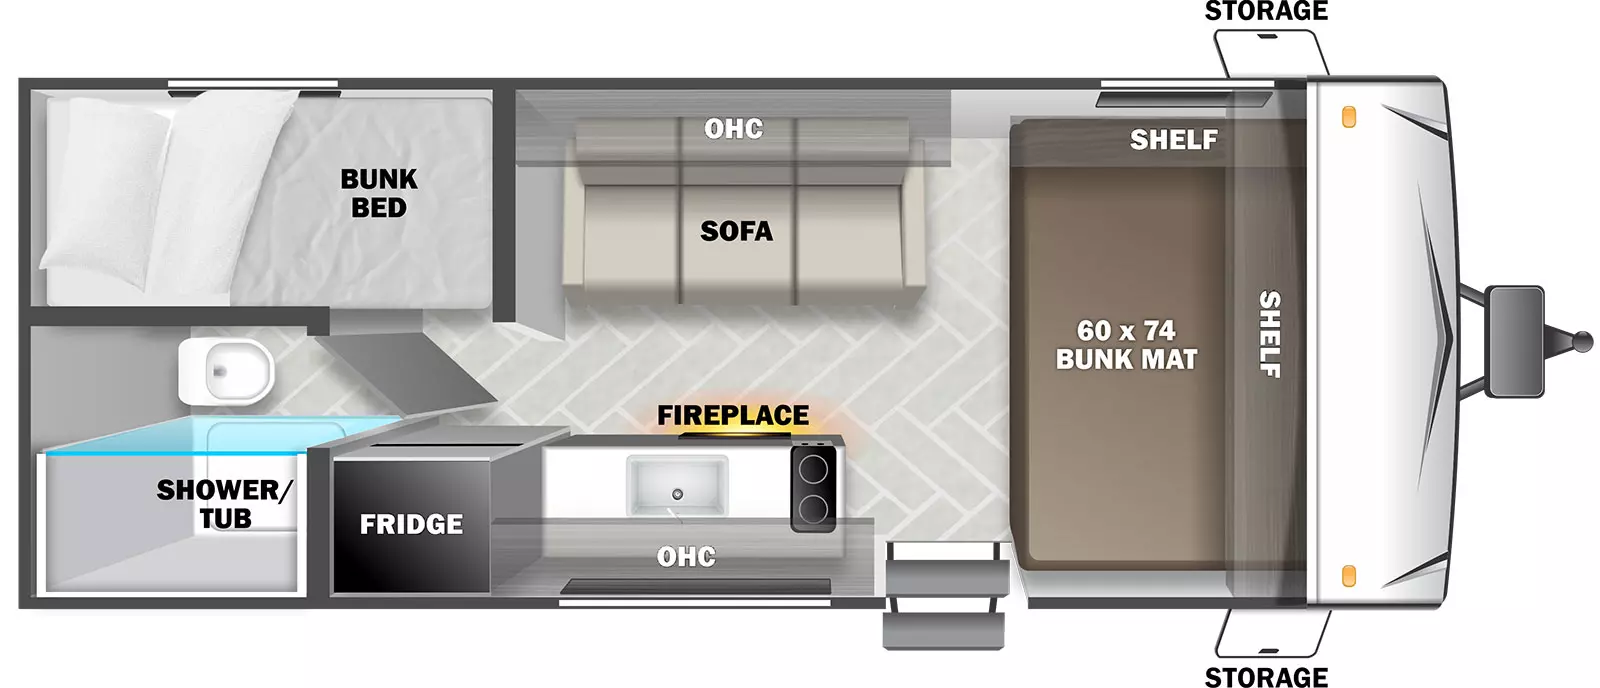 The T175BHGT has no slide outs and 1 entry door. Interior layout from front to back: front 60 x 74 bunk mat with shelves above; off-door side sofa with overhead cabinet; door side kitchen with sink, refrigerator, fireplace, overhead cabinet and stove top; rear door side bathroom with shower/tub and toilet; and rear off-door side bunk bed.